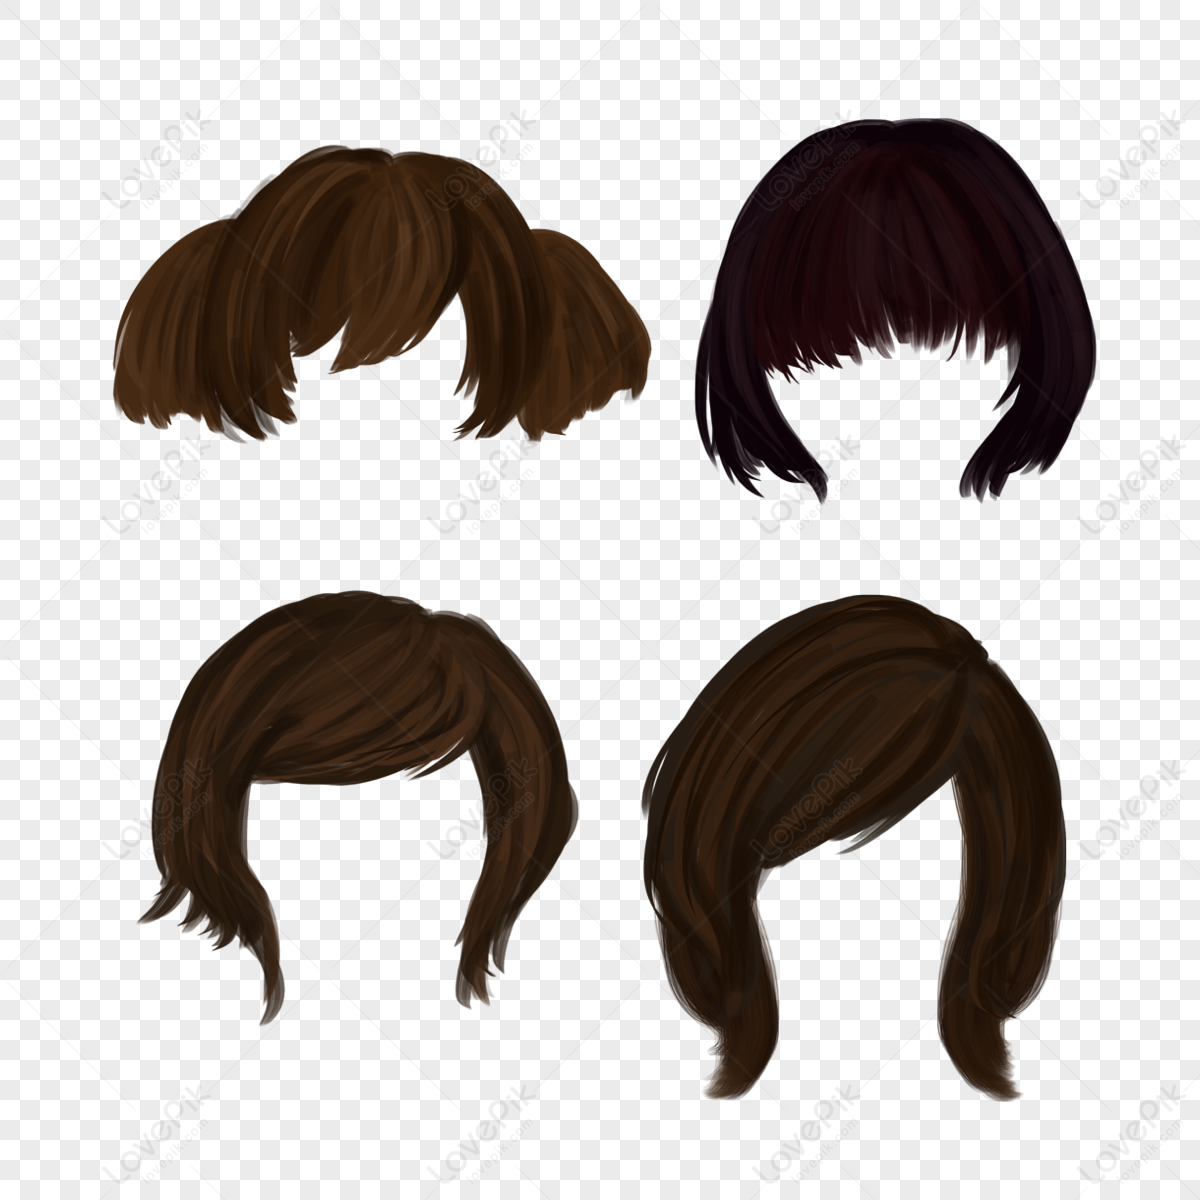 Download Editing Hair Png Download Cb Hair Png Download - Hairstyle Png For  Picsart PNG Image with No Background - PNGkey.com